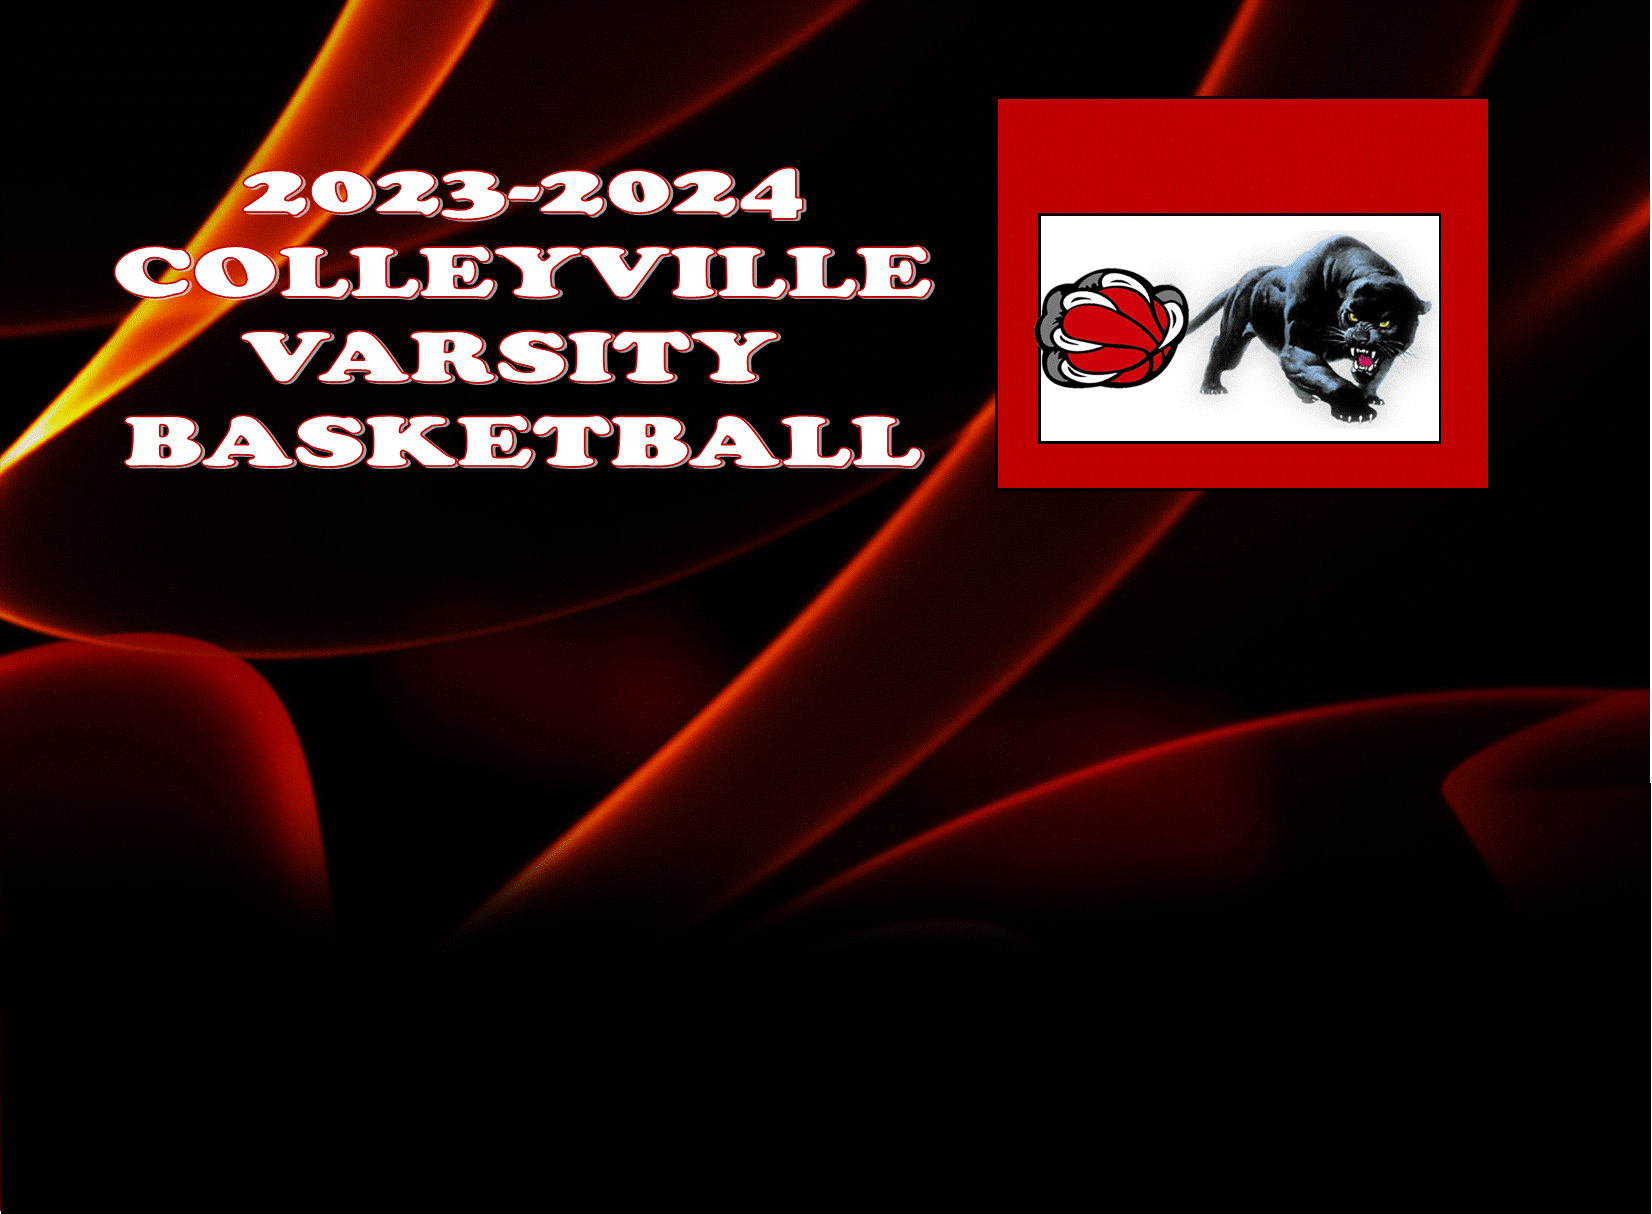 CHHS Varsity Basketball: Colleyville Panthers Slip Past Brewer Bears in Quarterfinals Playoff Game 40-39